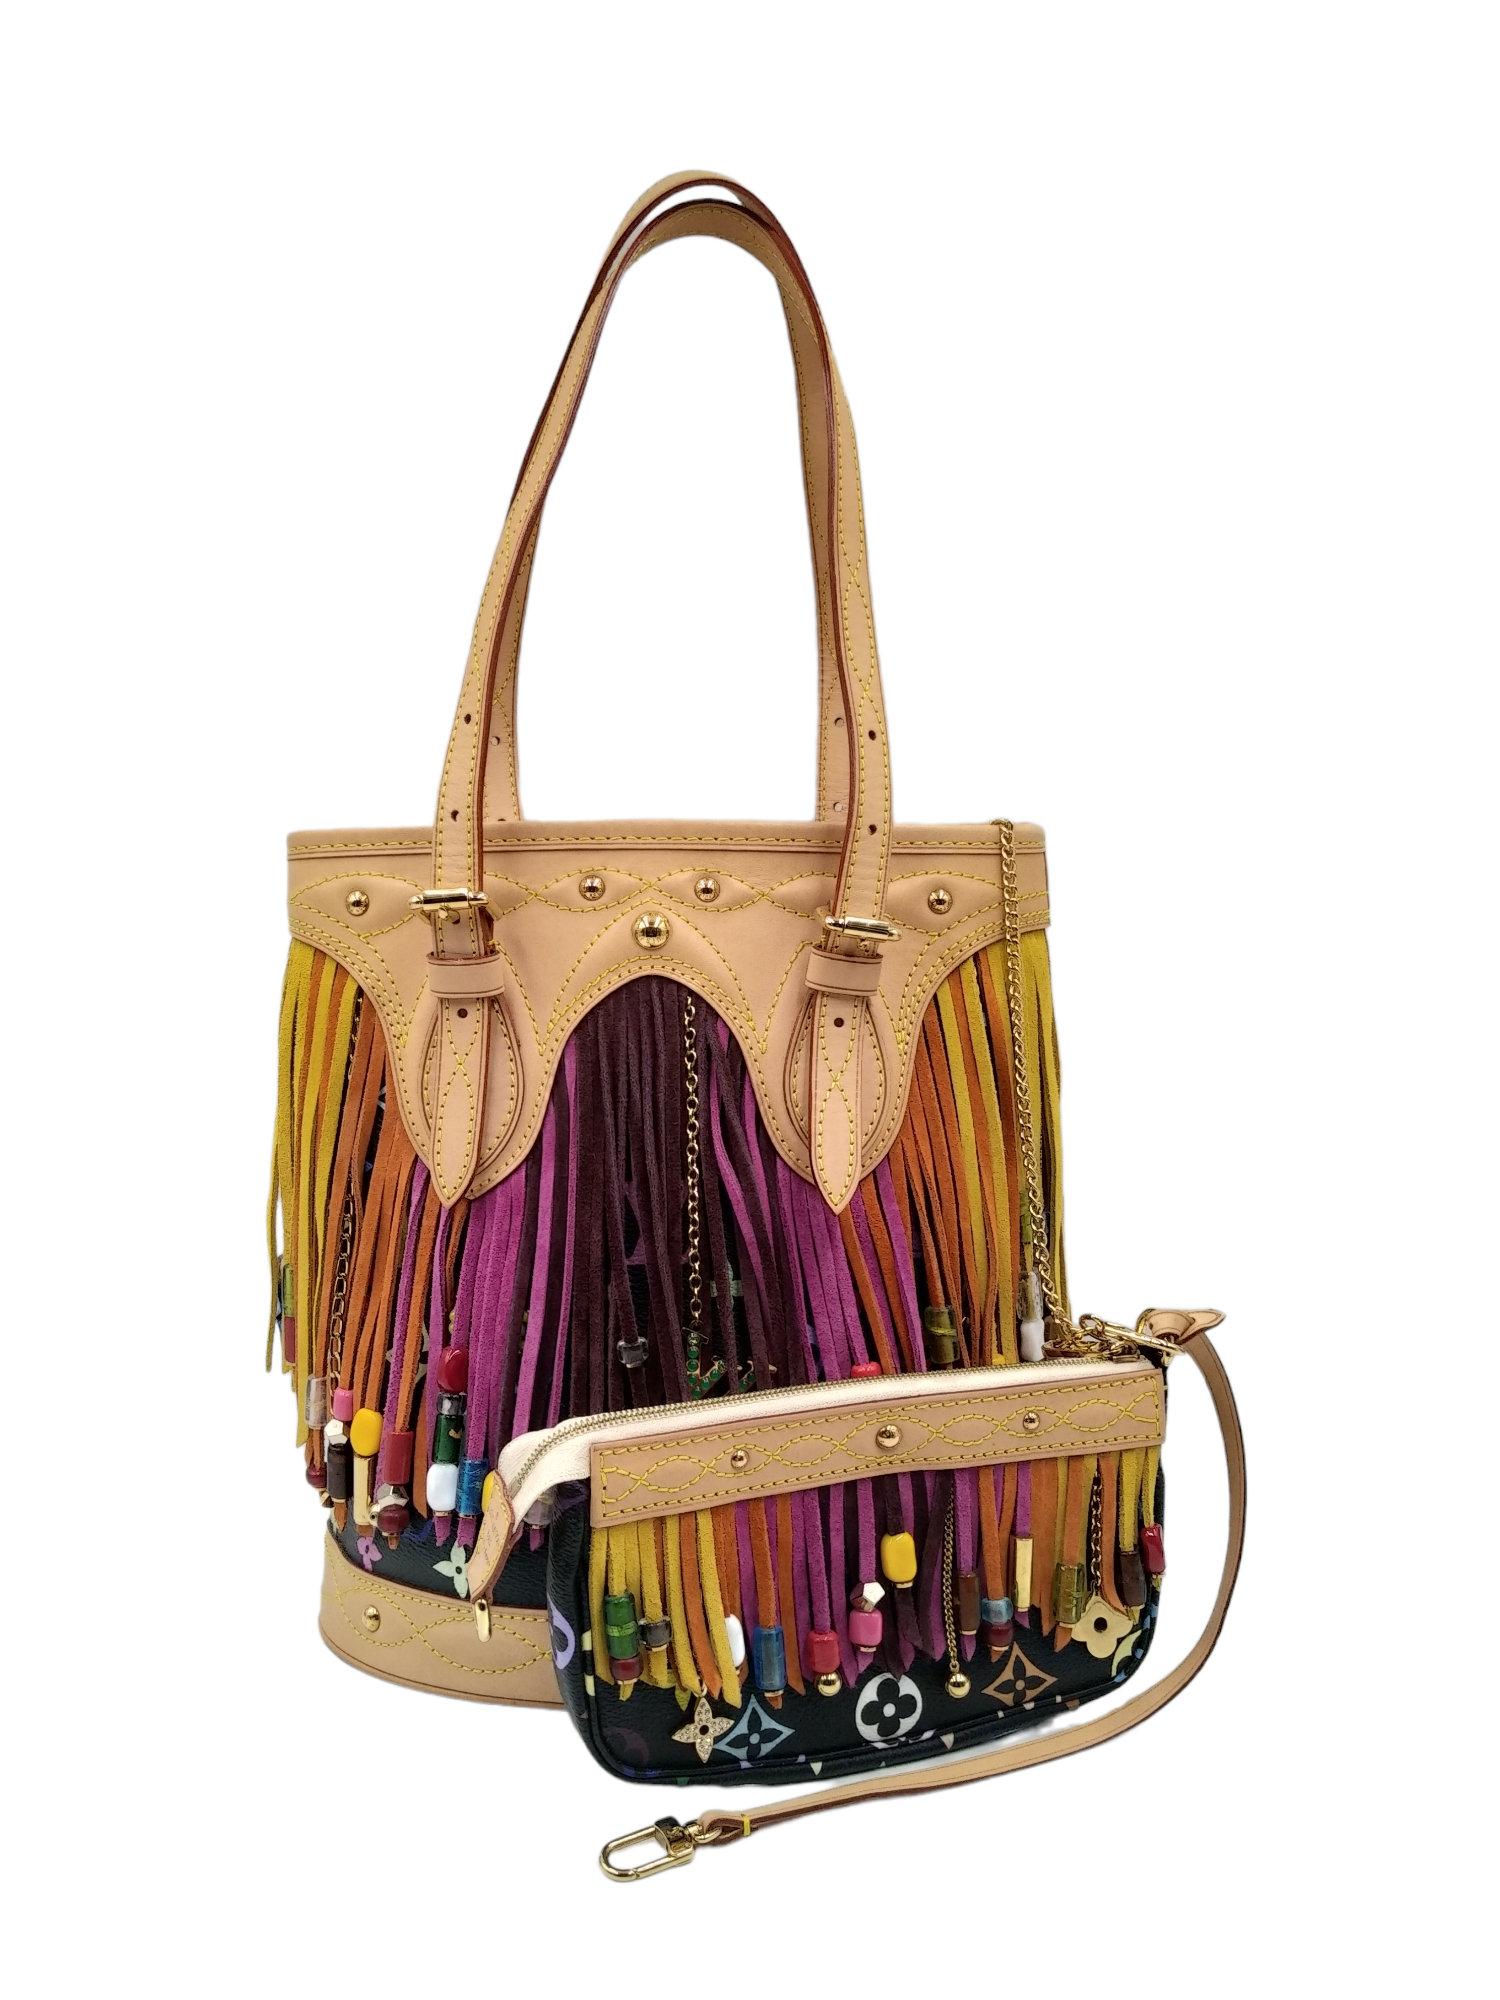 Louis Vuitton Limited Edition Black Monogram Multicolor Fringe Bucket Bag with Accessories Pouch, 2006
- 100% authentic Louis Vuitton 
- Monogram coated canvas with leather trim and suede fringe
- Double flat adjustable leather shoulder straps
- 